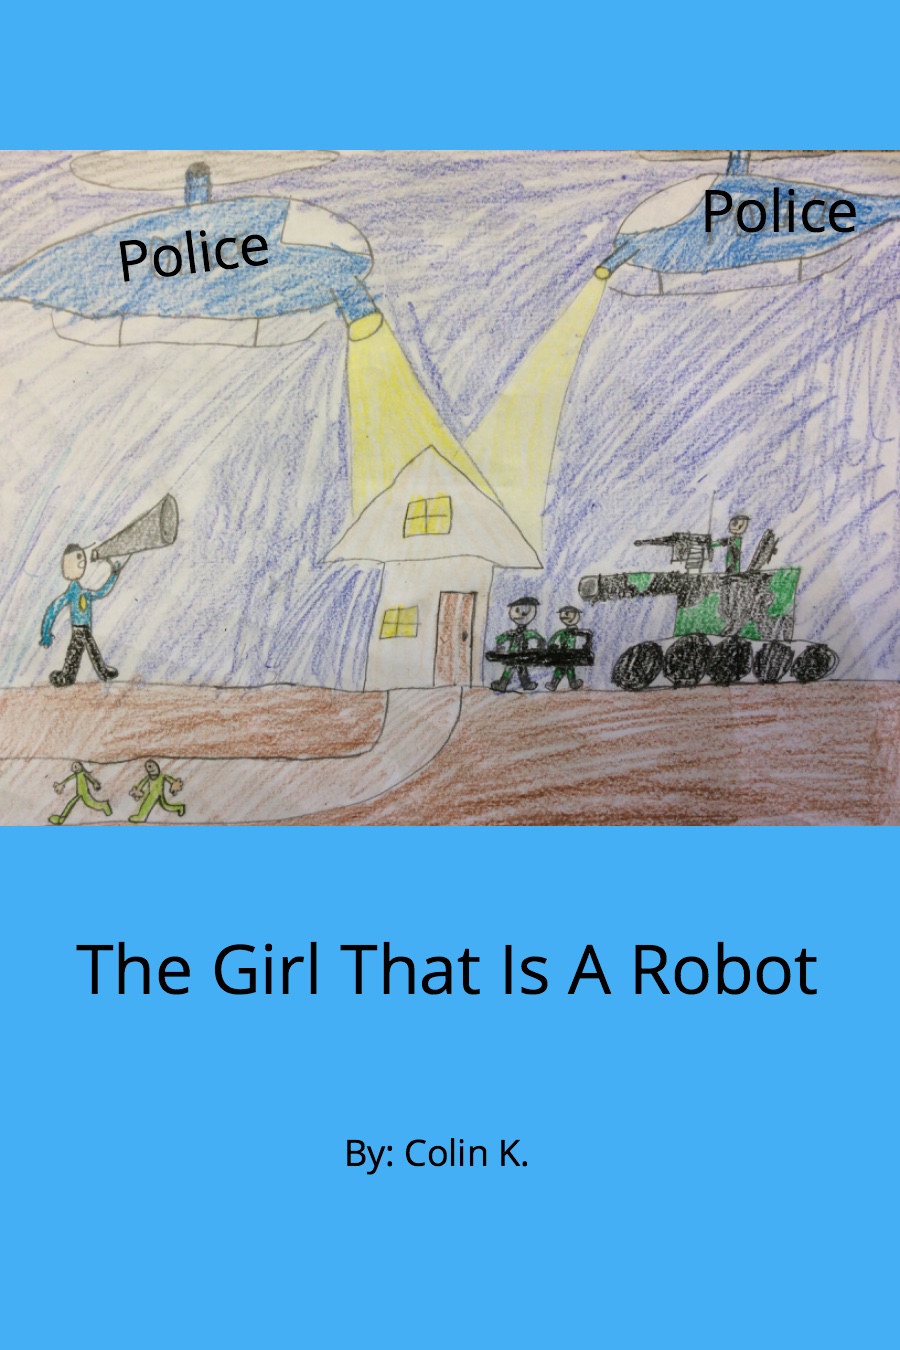 The Girl That is a Robot by Colin K